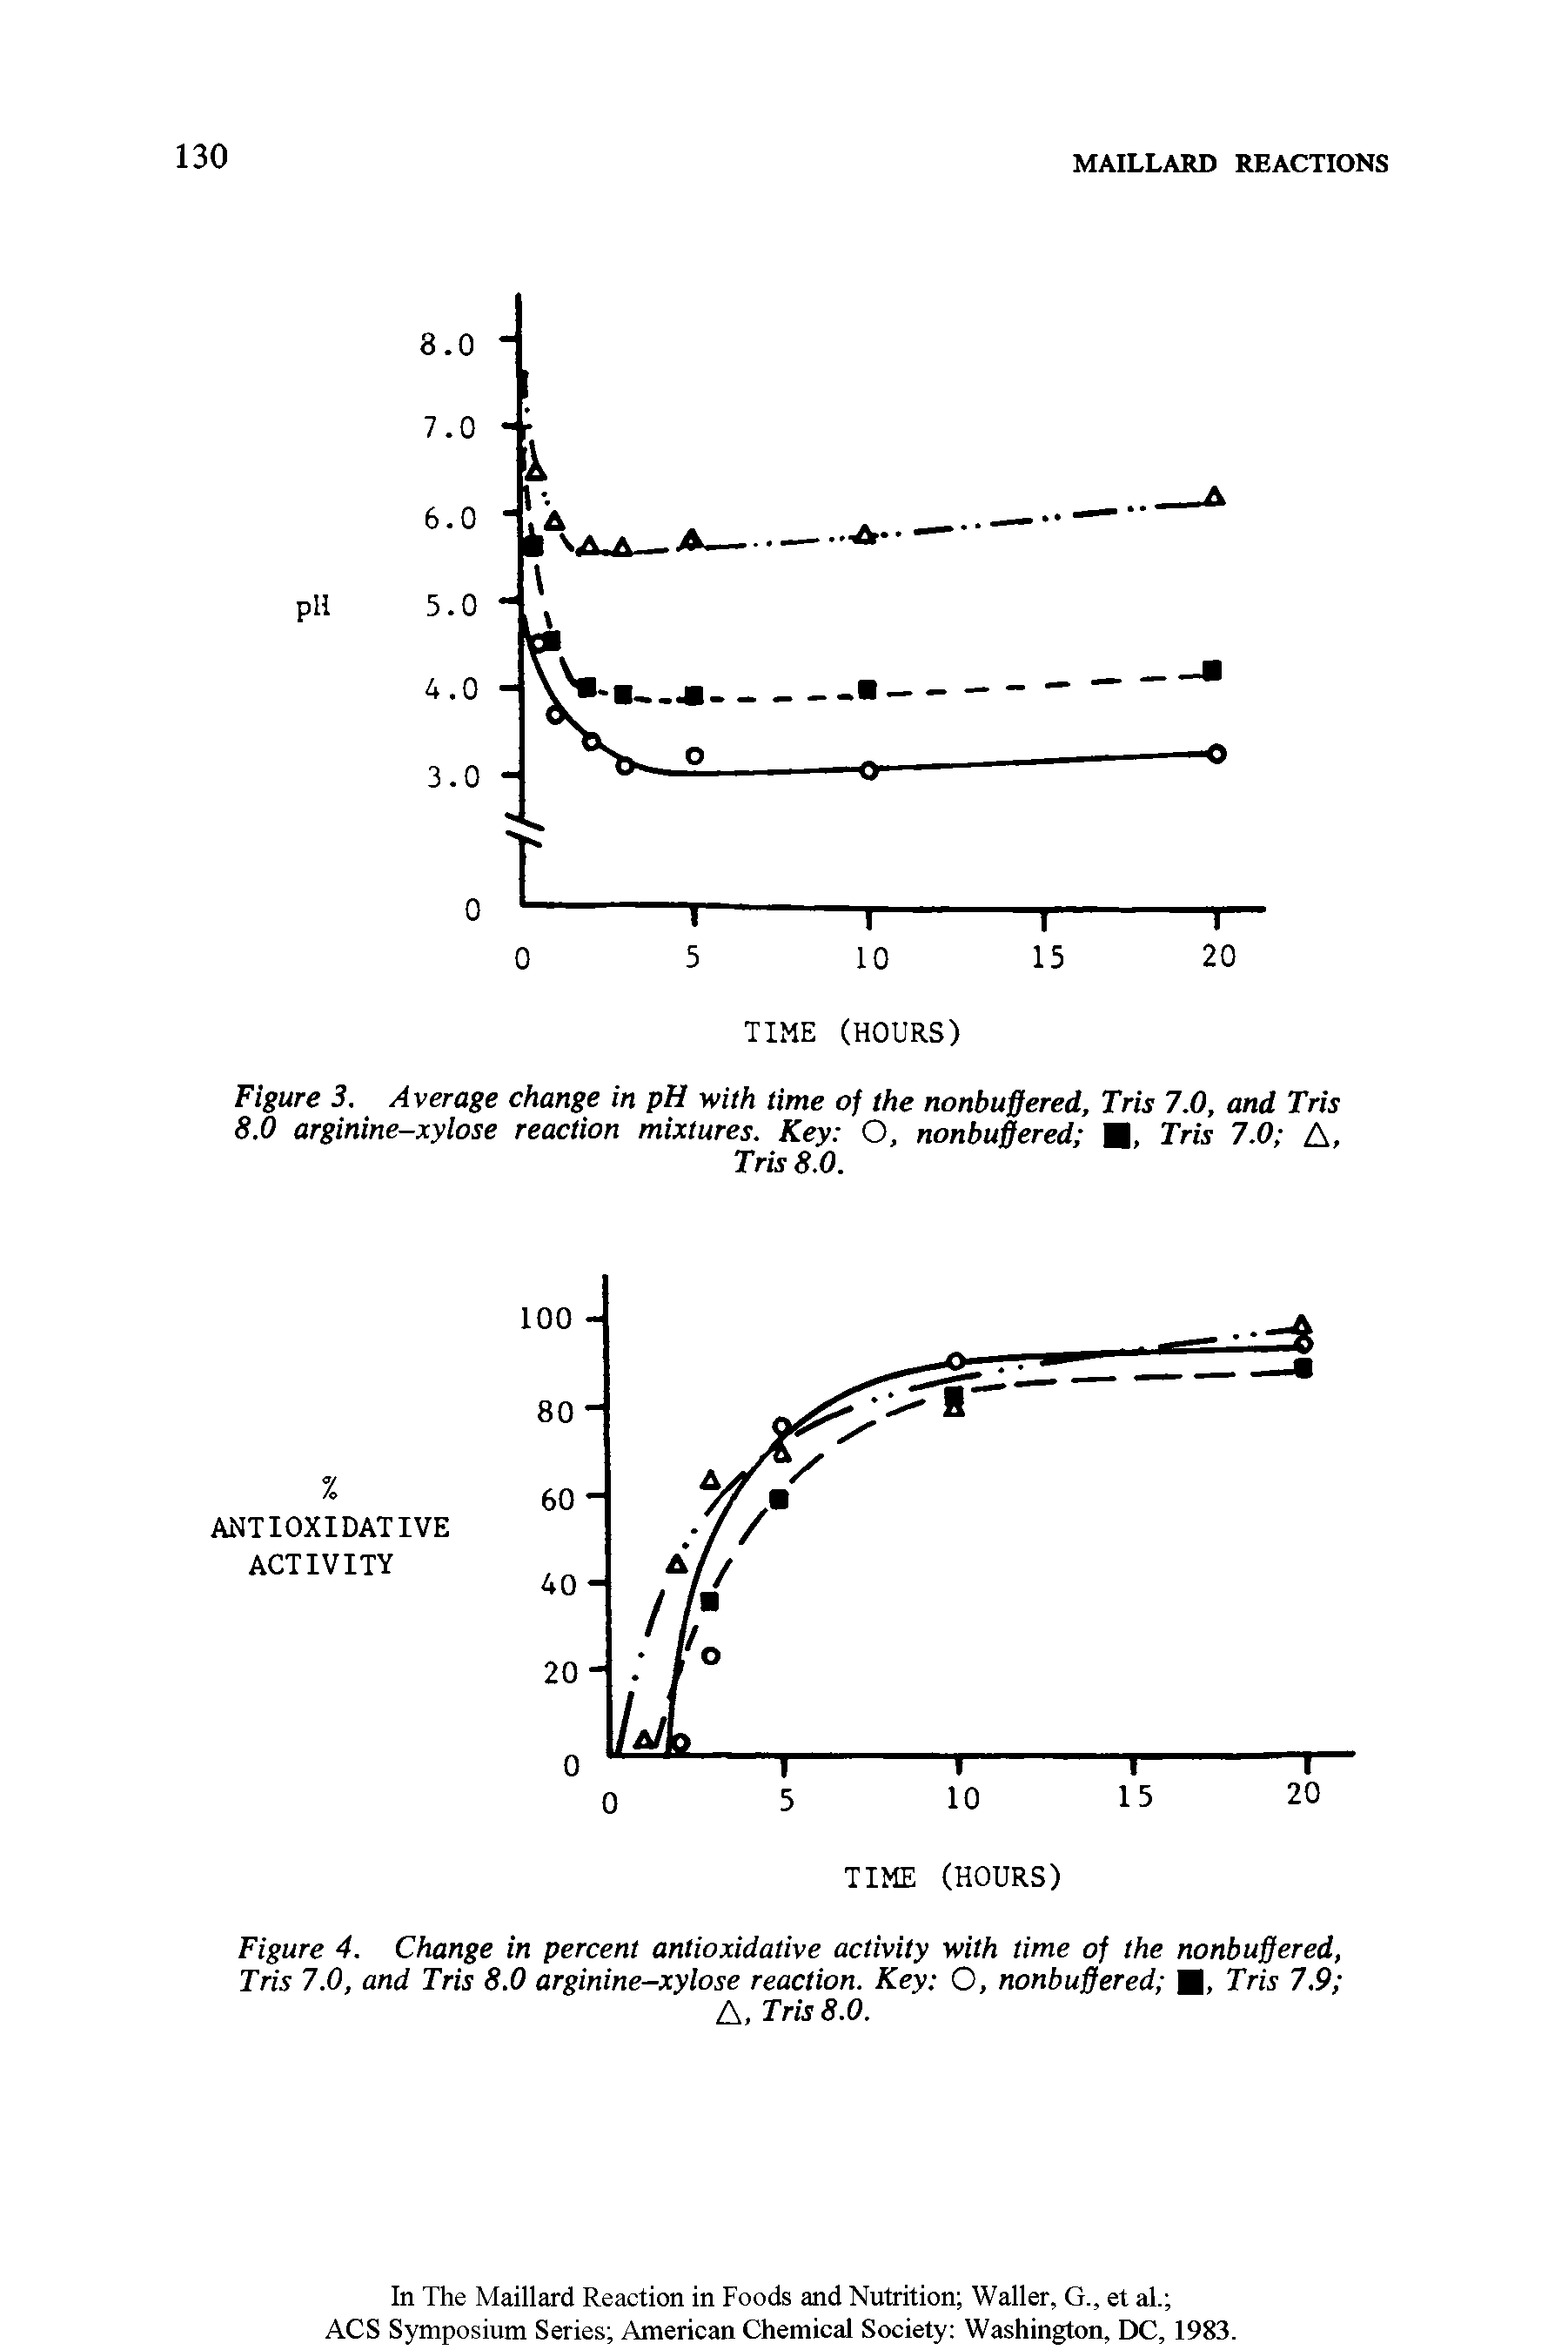 Figure 3. Average change in pH with time of the nonbuffered, Tris 7.0, and Tris 8.0 arginine-xylose reaction mixtures. Key O, nonbuffered , Tris 7.0 A,...